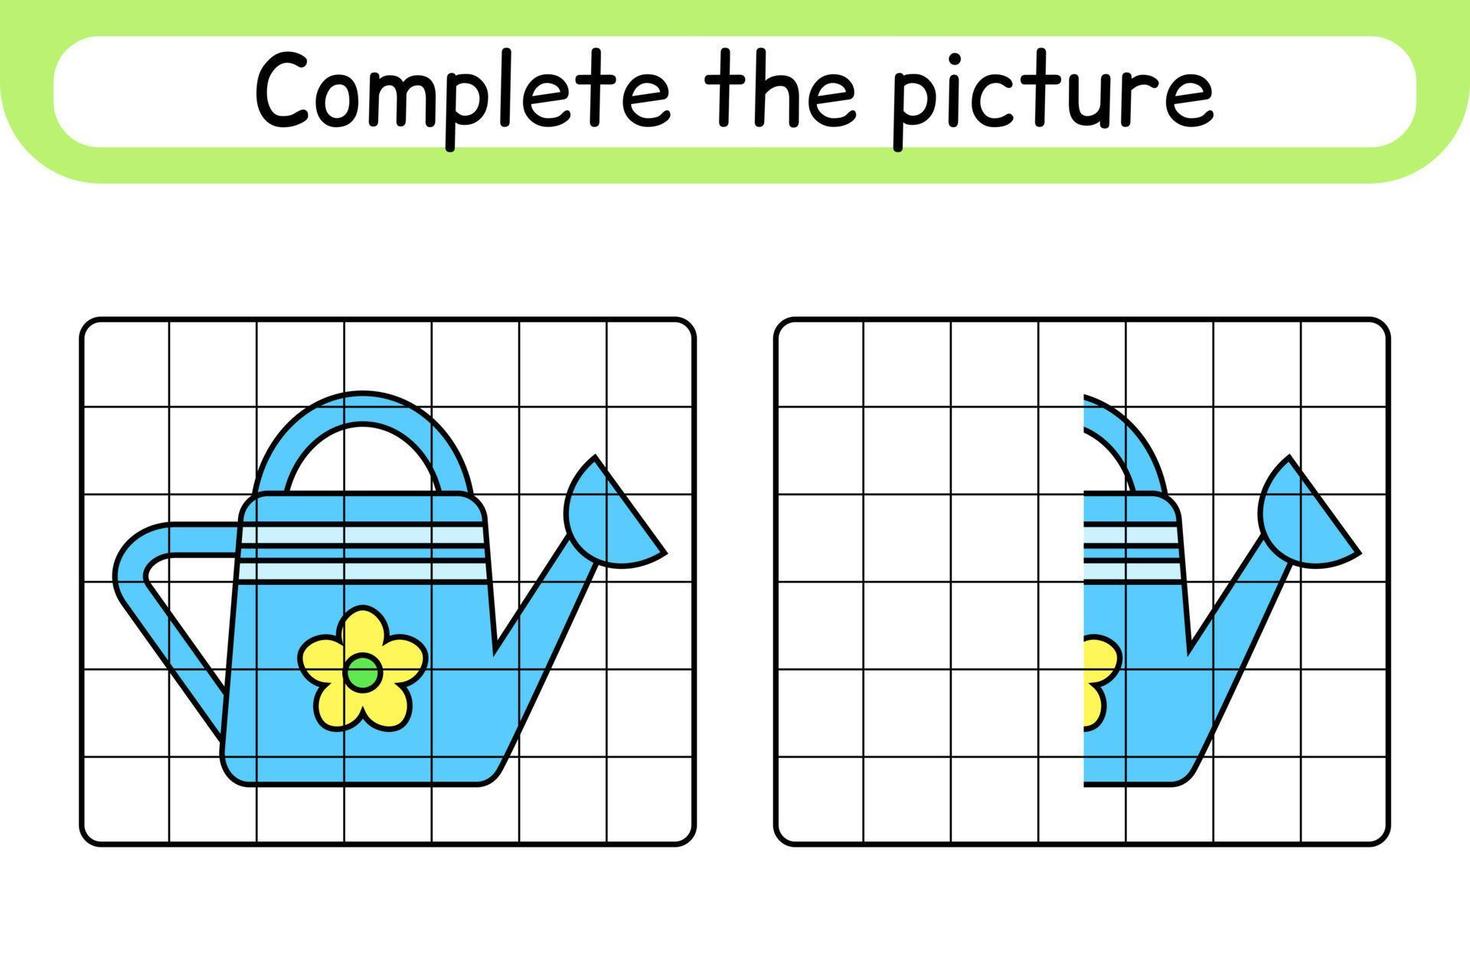 Complete the picture watering can. Copy the picture and color. Finish the image. Coloring book. Educational drawing exercise game for children vector